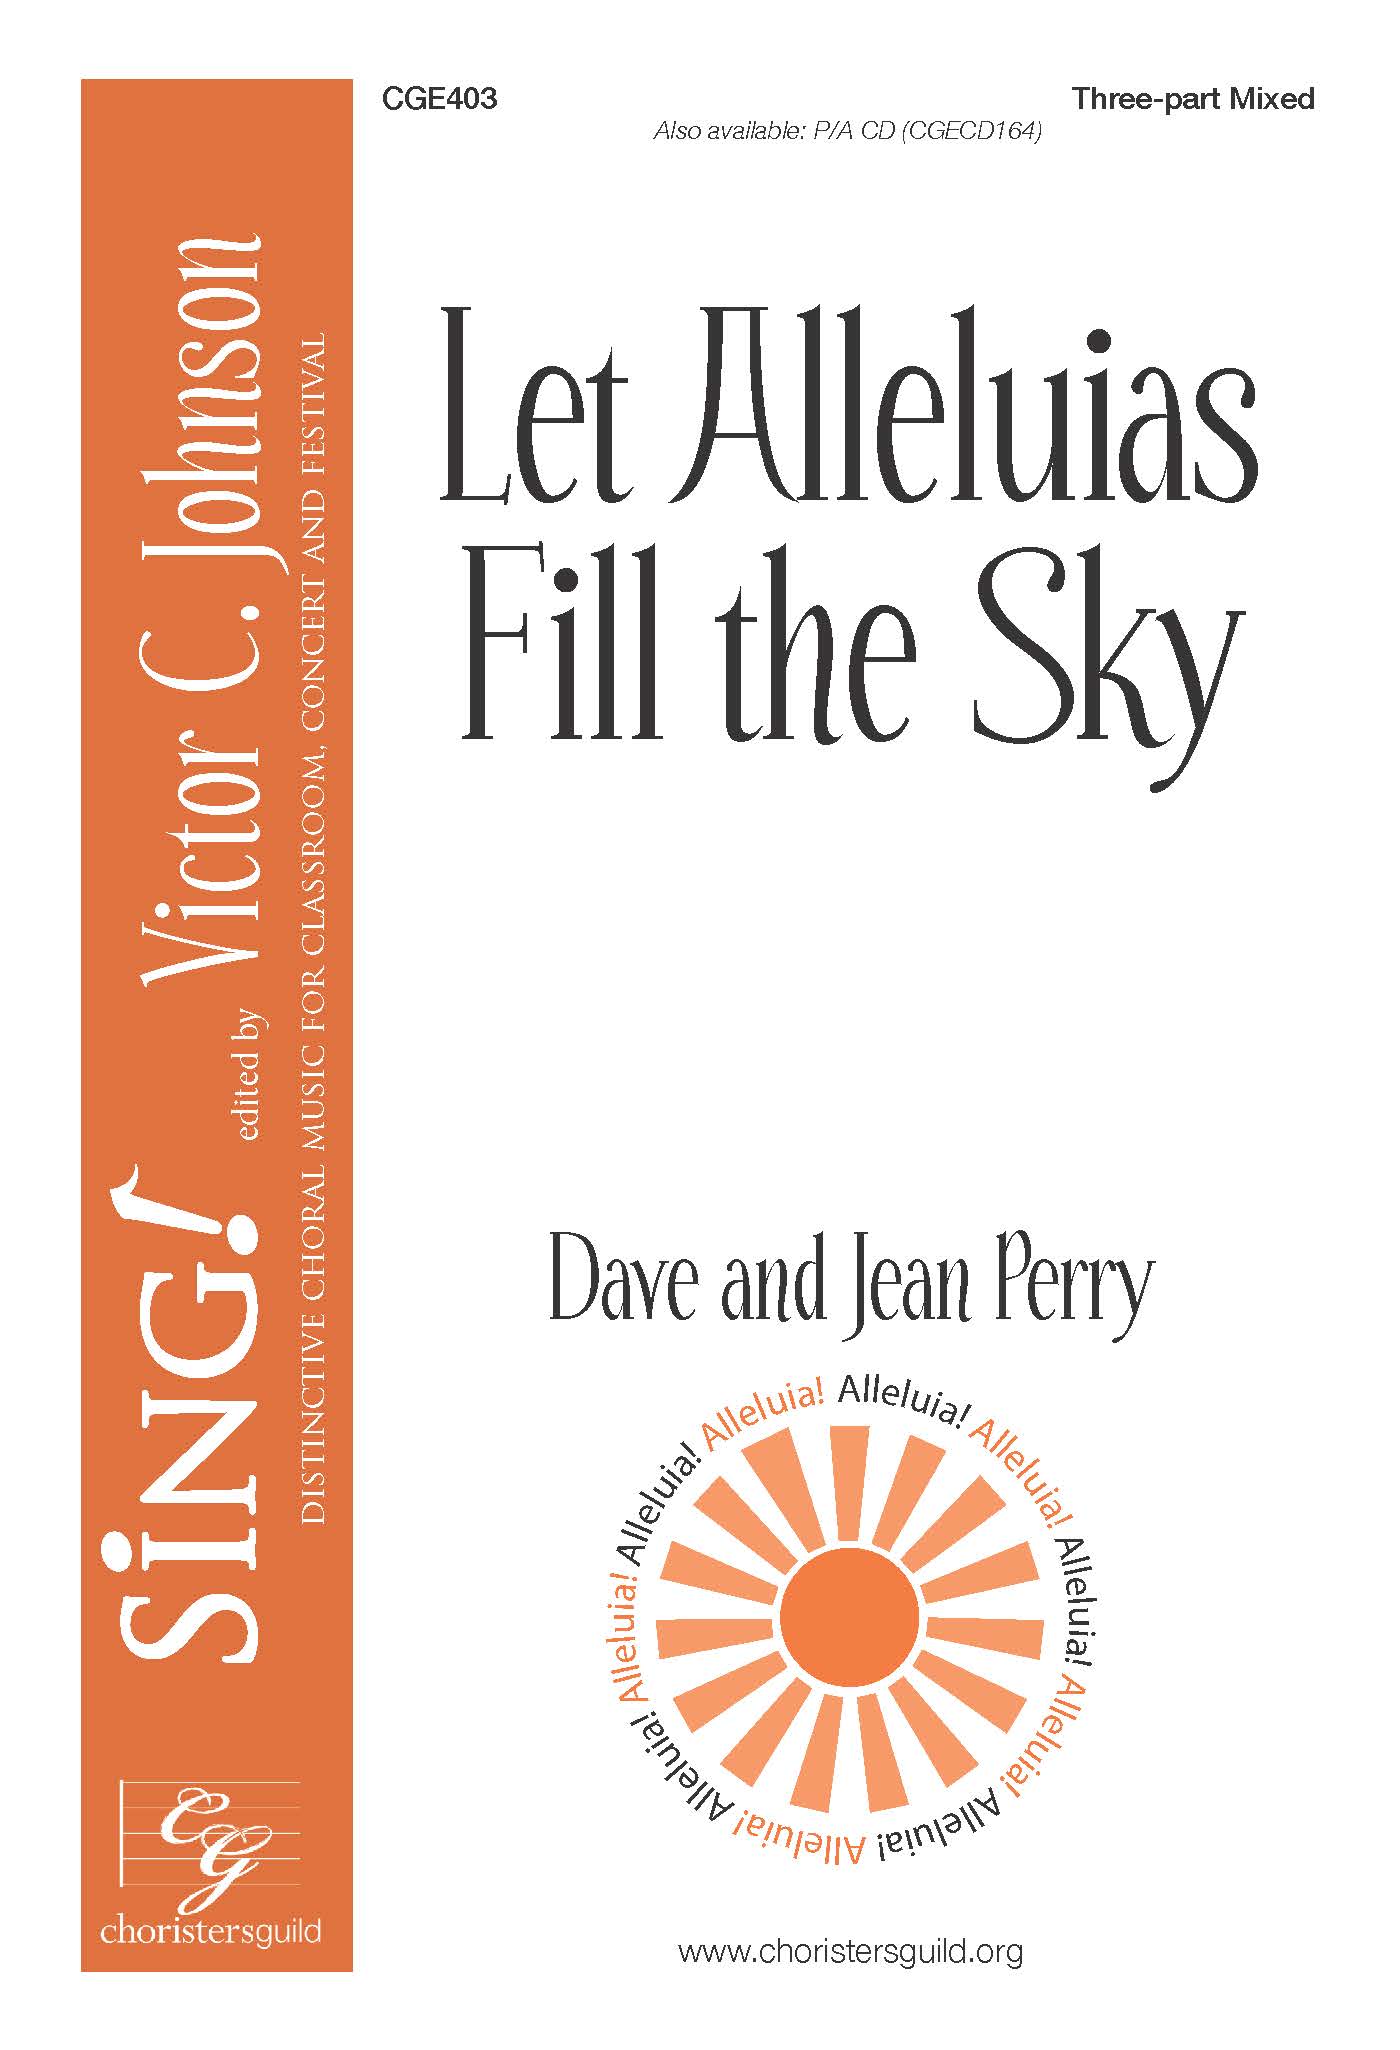 Let Alleluias Fill the Sky - Three-part Mixed